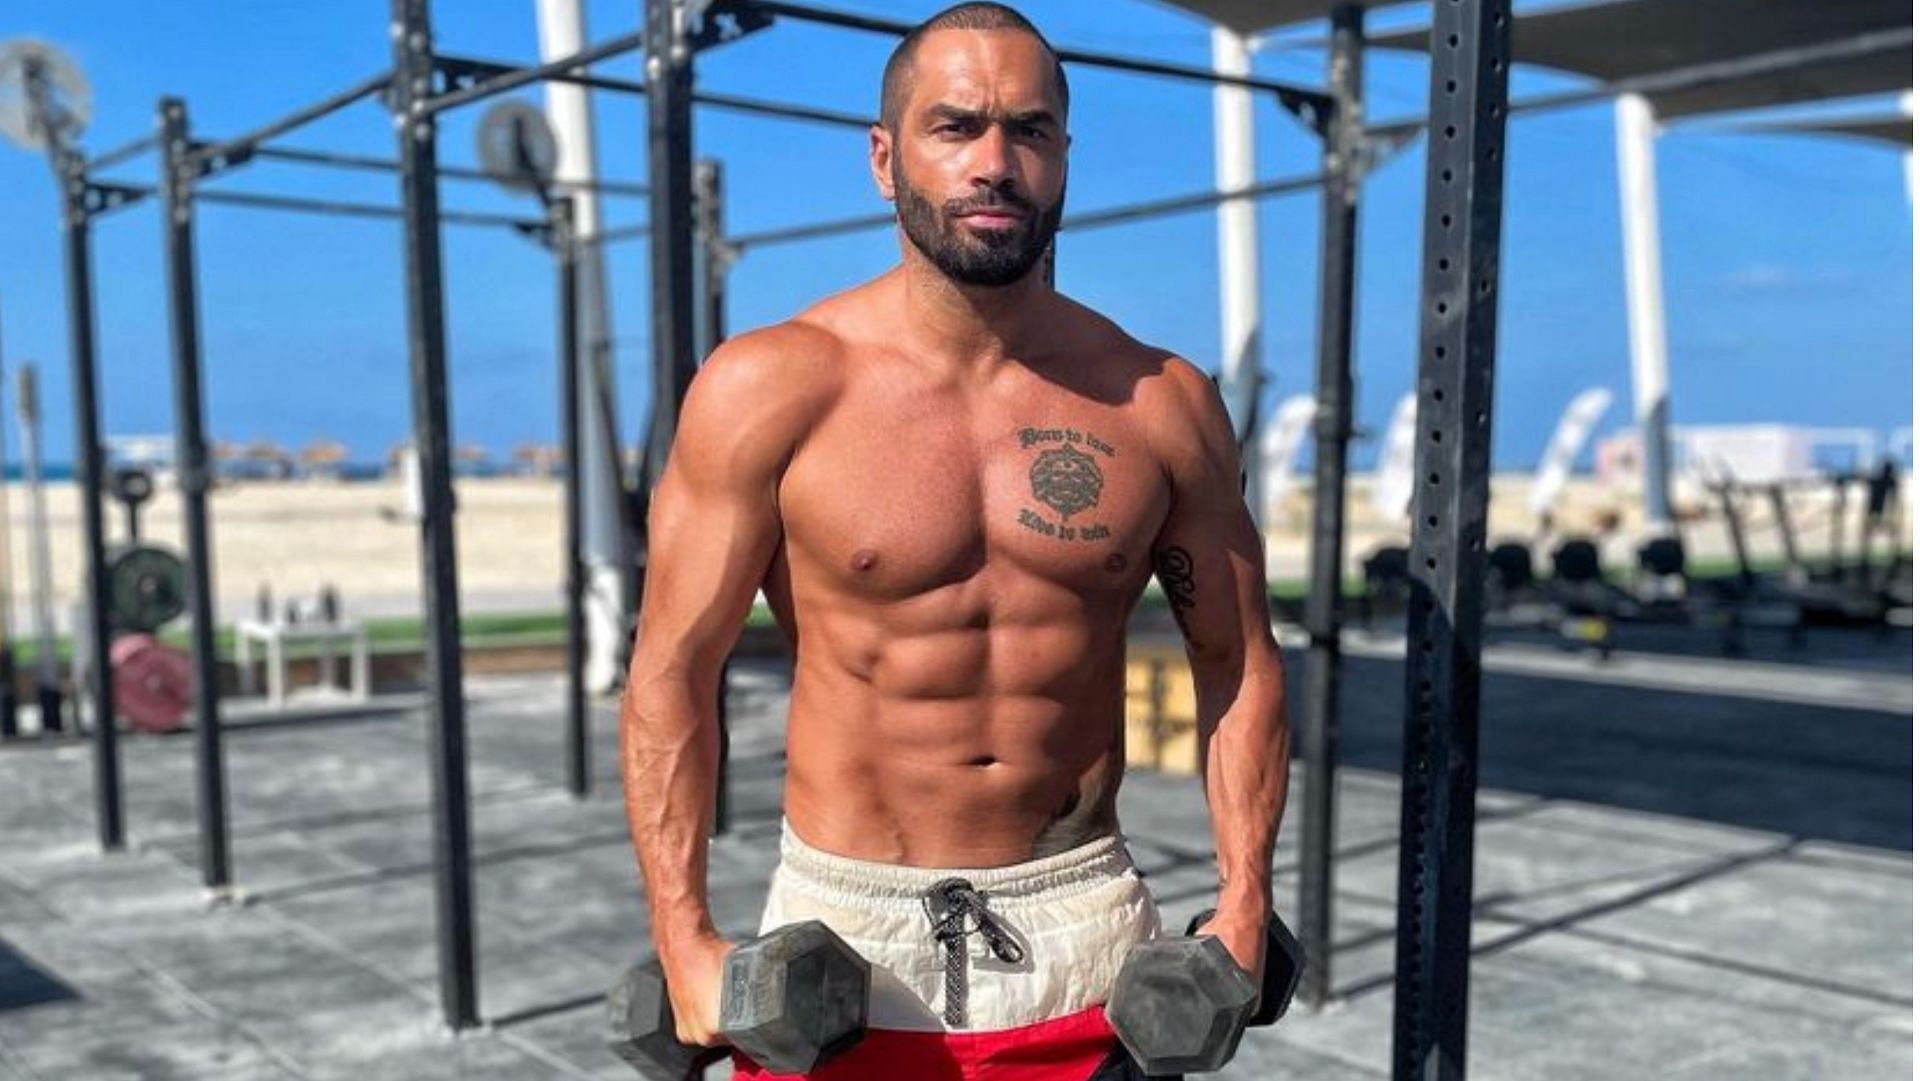 Lazar Angelov&#039;s believes in a proper workout and diet routine for peak fitness and athletic excellence. (Image by @lazar_angelov_official via Instagram)